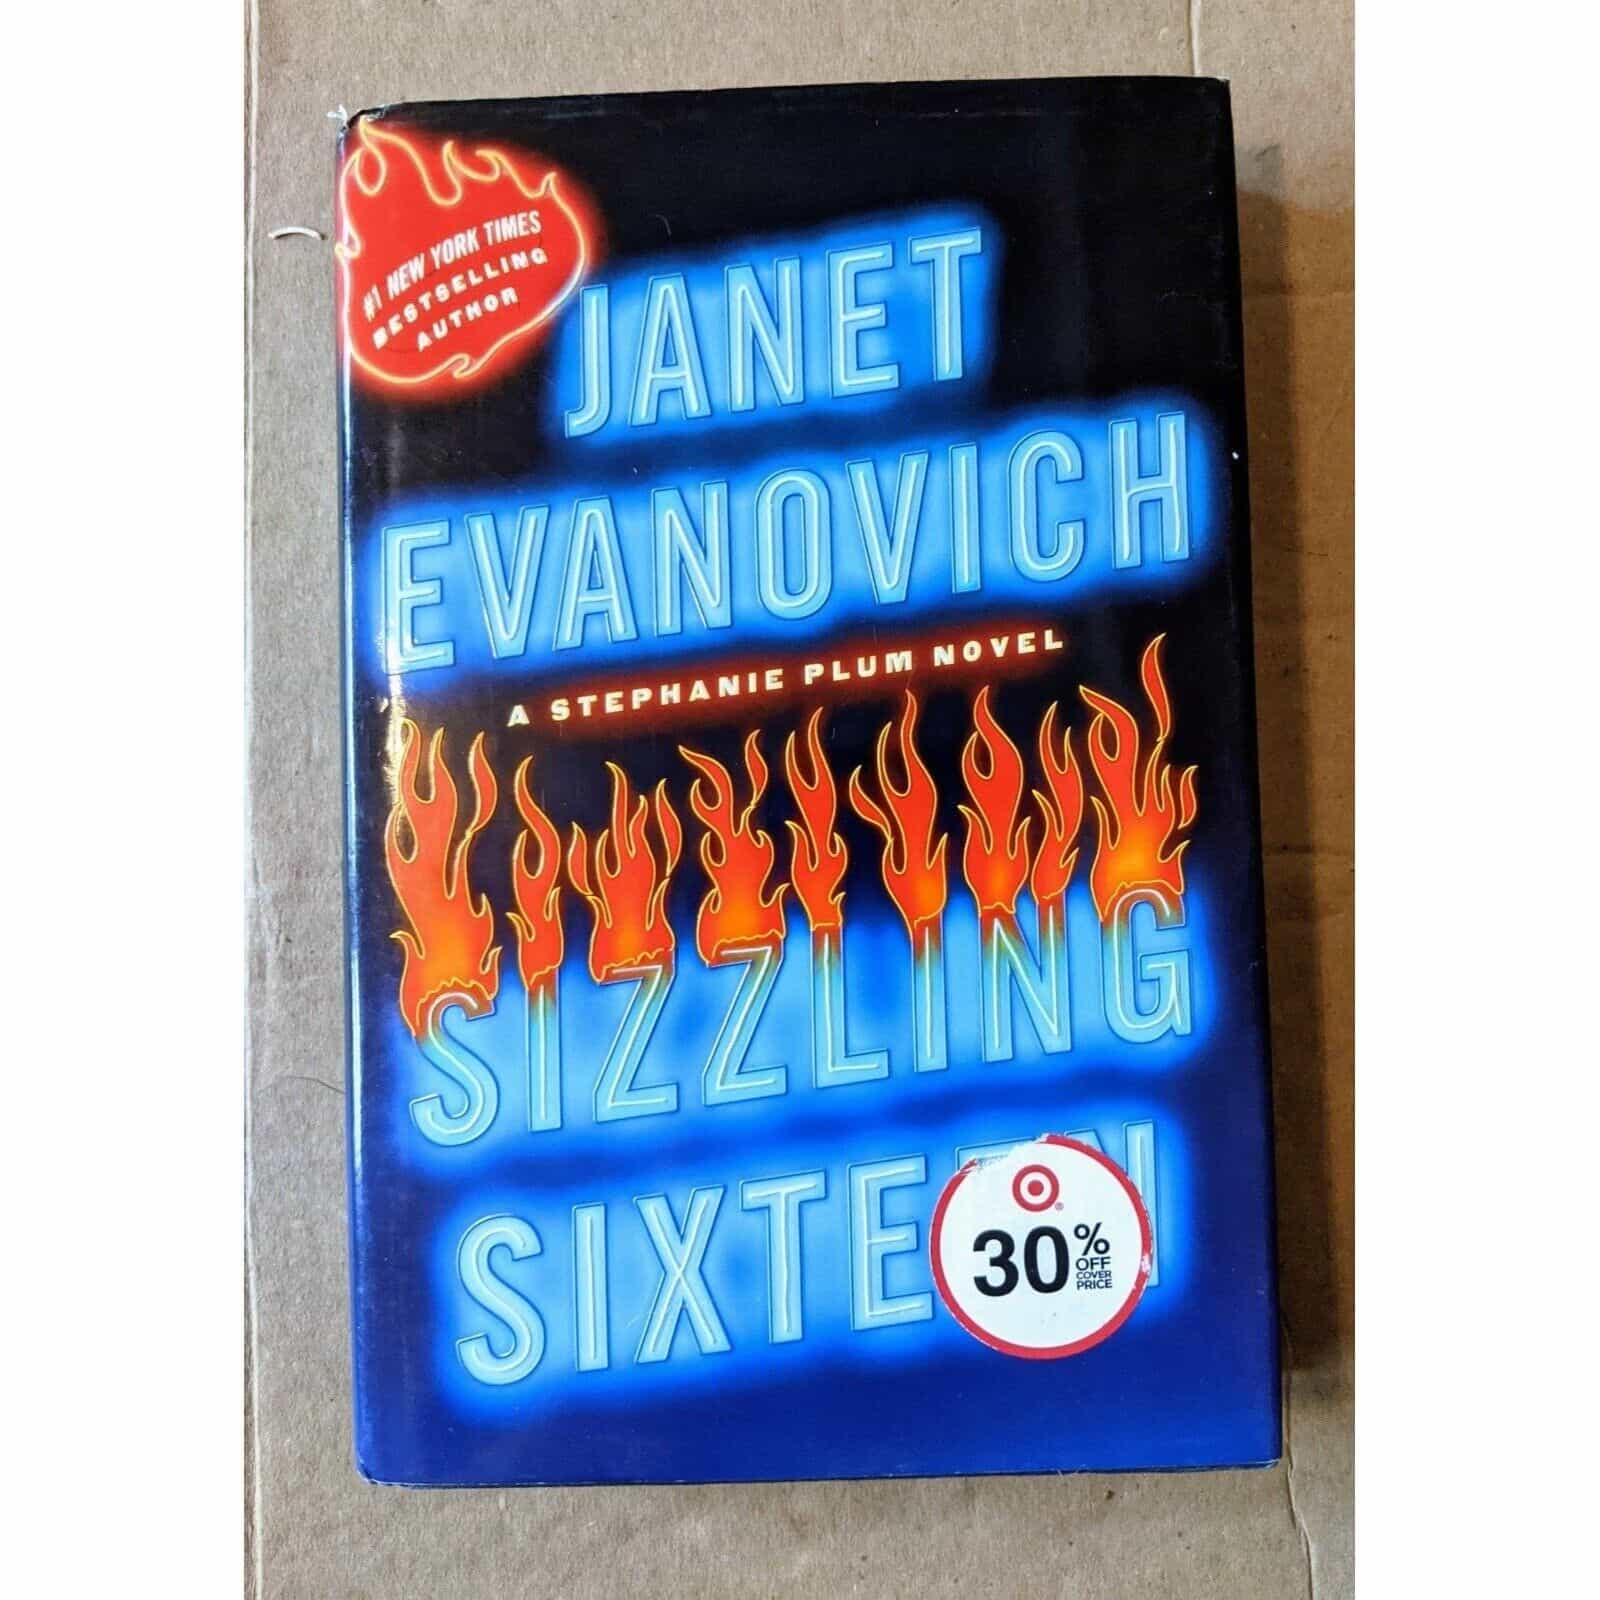 Sizzling Sixteen by Janet Evanovich Book